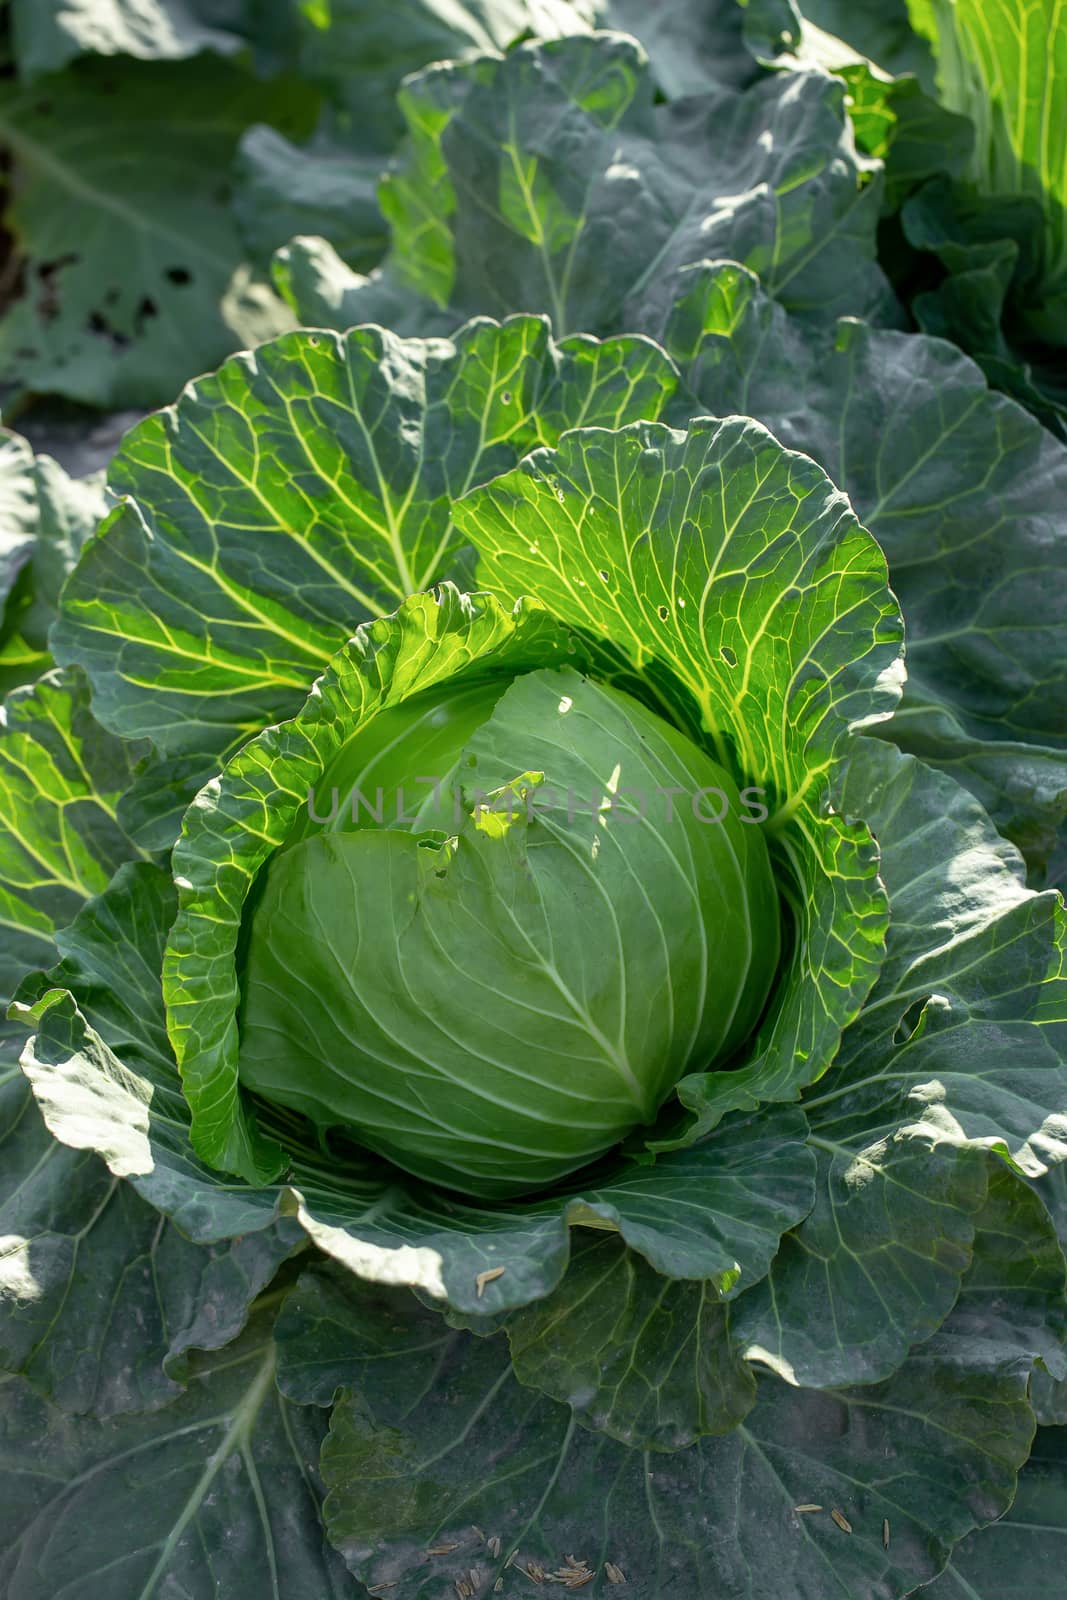 Fresh cabbage from farm field, cabbage in the garden.